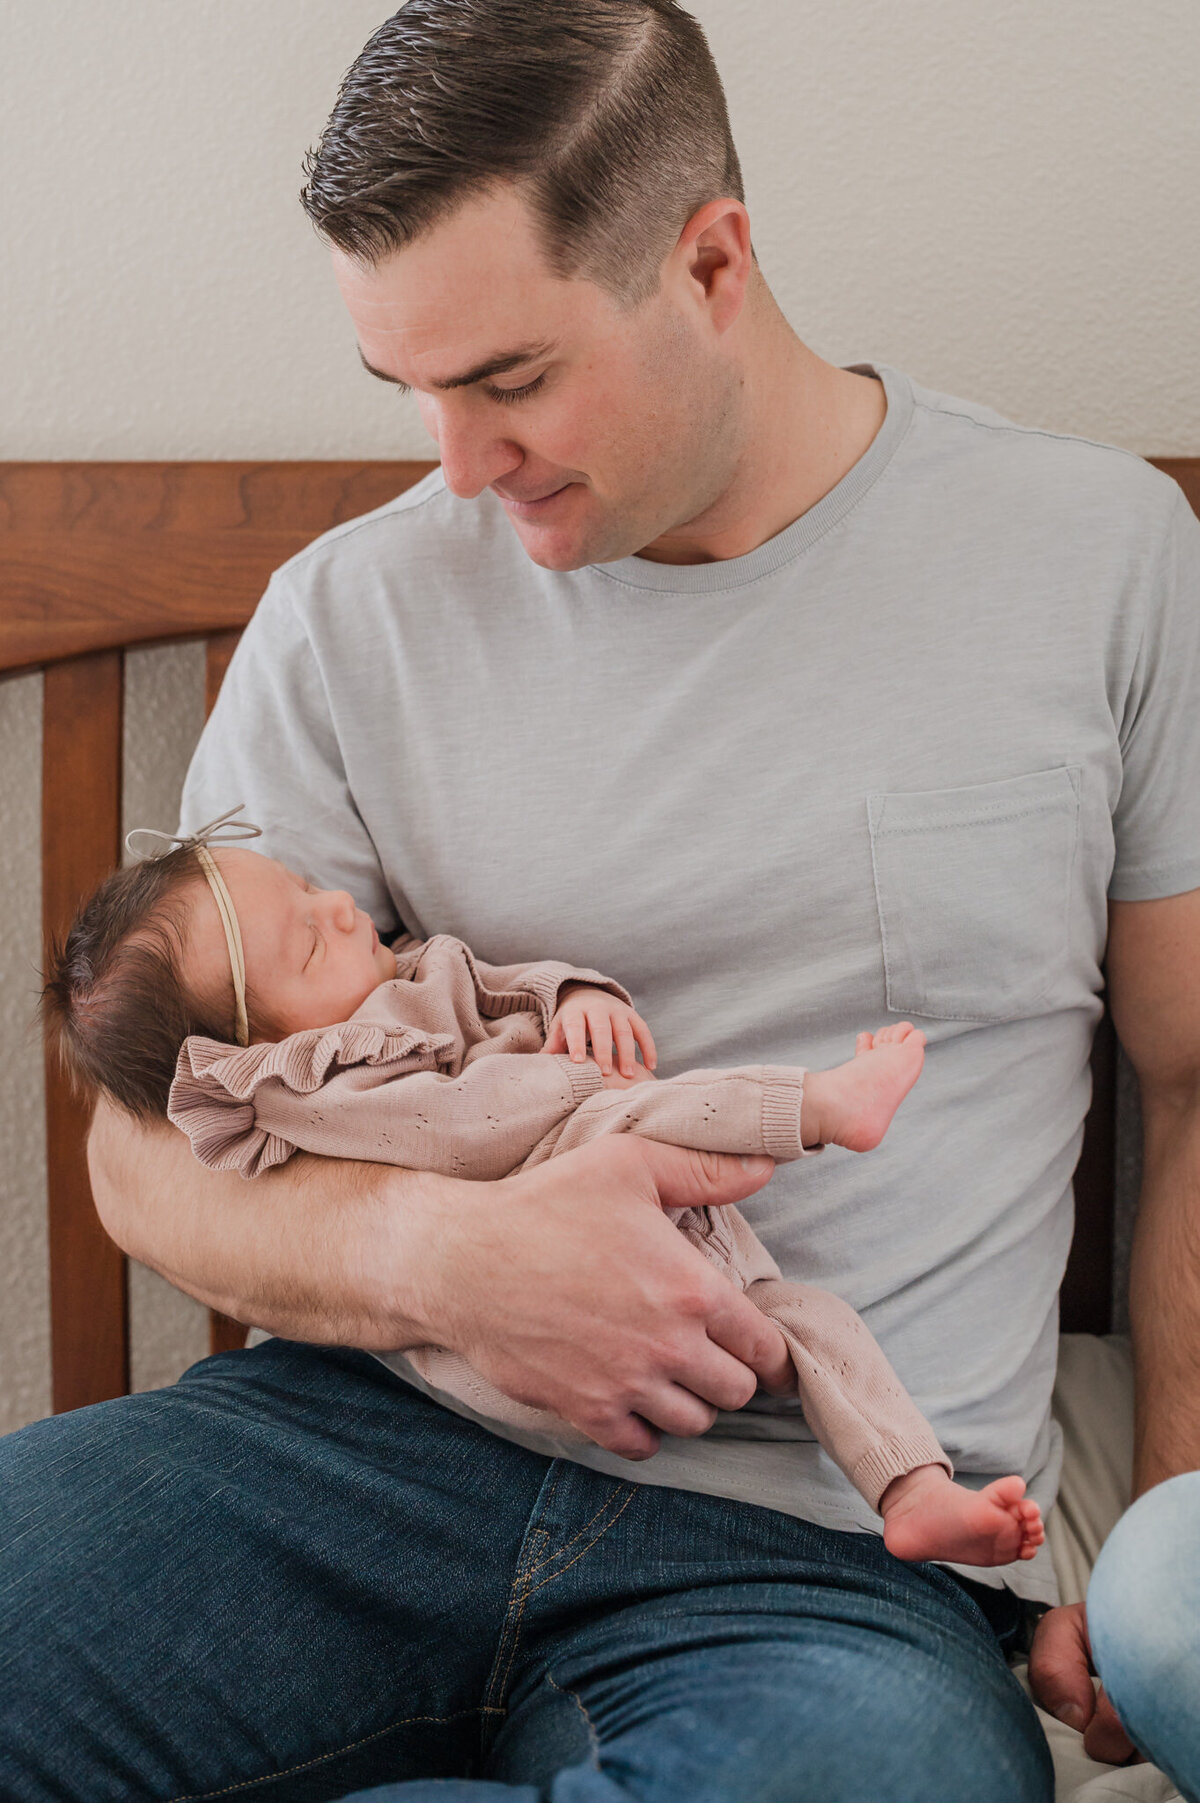 Dad cradles his baby daughter and gazes down at her during in-home newborn pictures in San Antonio.